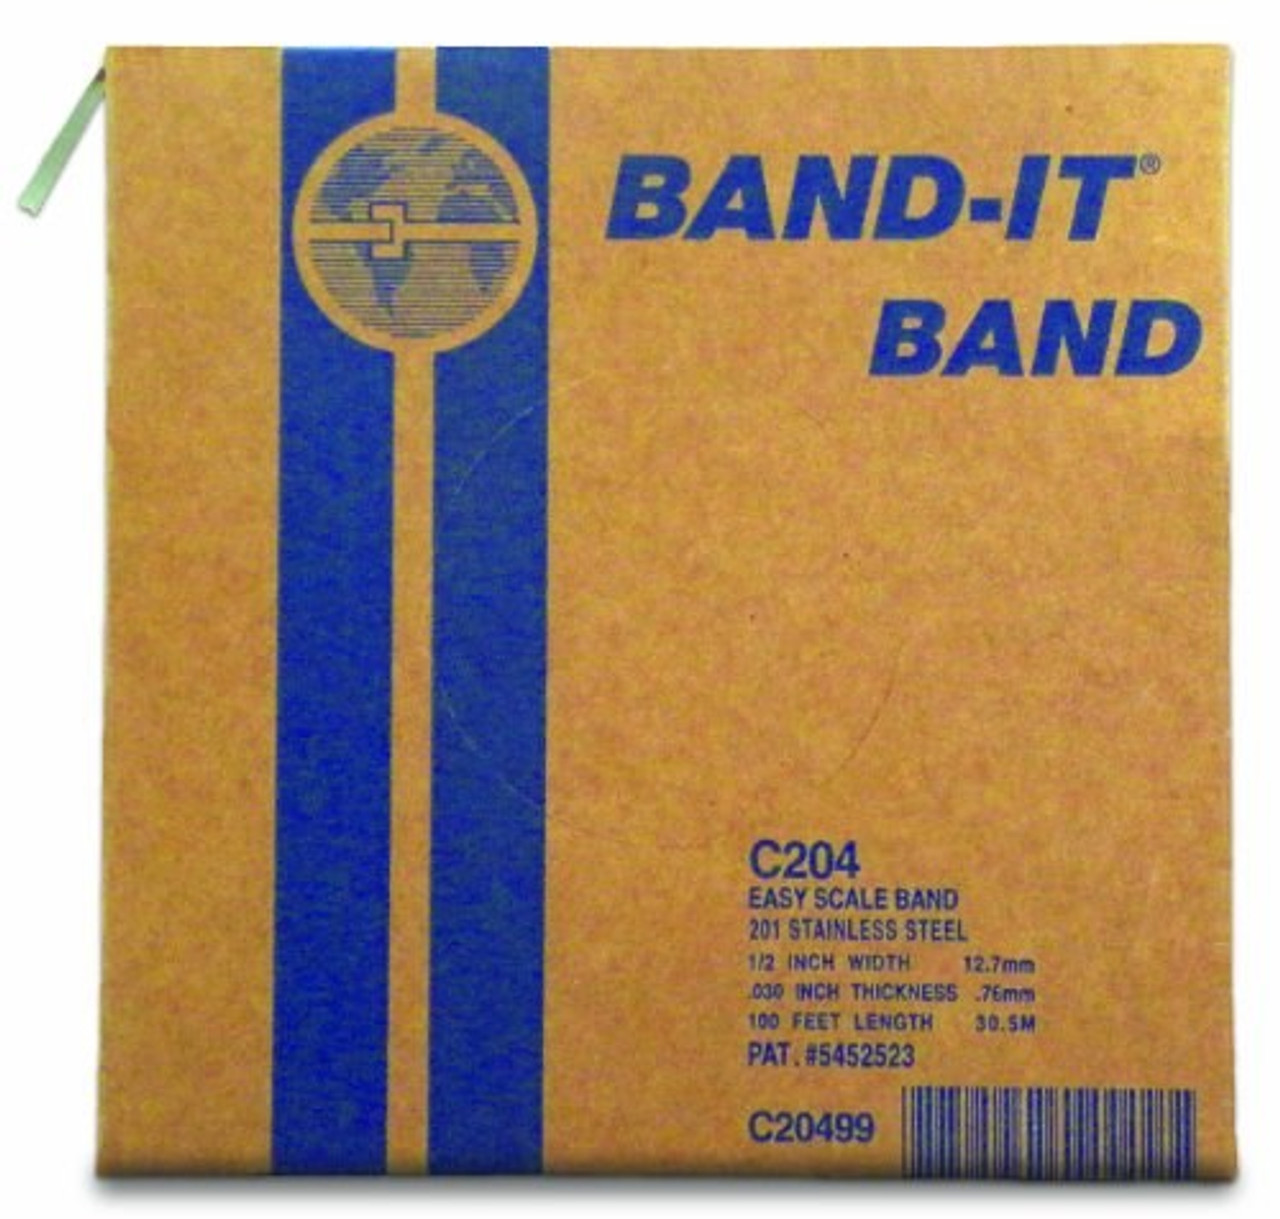  BAND-IT Valuband Band C14499, 200/300 Stainless Steel, 1/2  Wide x 0.025 Thick (100 Foot Roll) : Industrial & Scientific